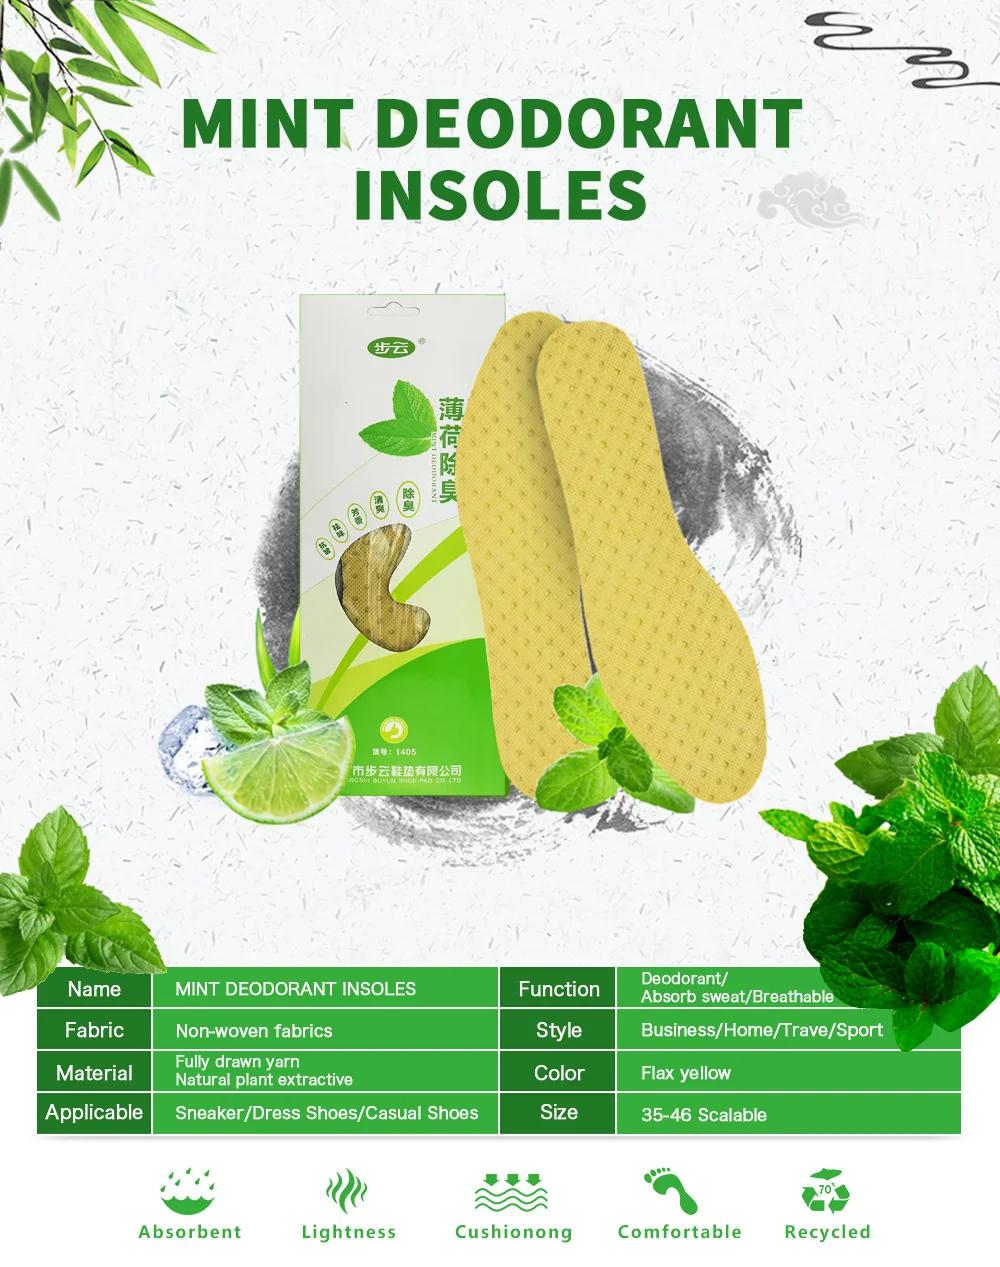 PCSsole deodorant insoles light weight mint herbal shoes pad absorb sweat breathable shoes pad cushion A1004 10